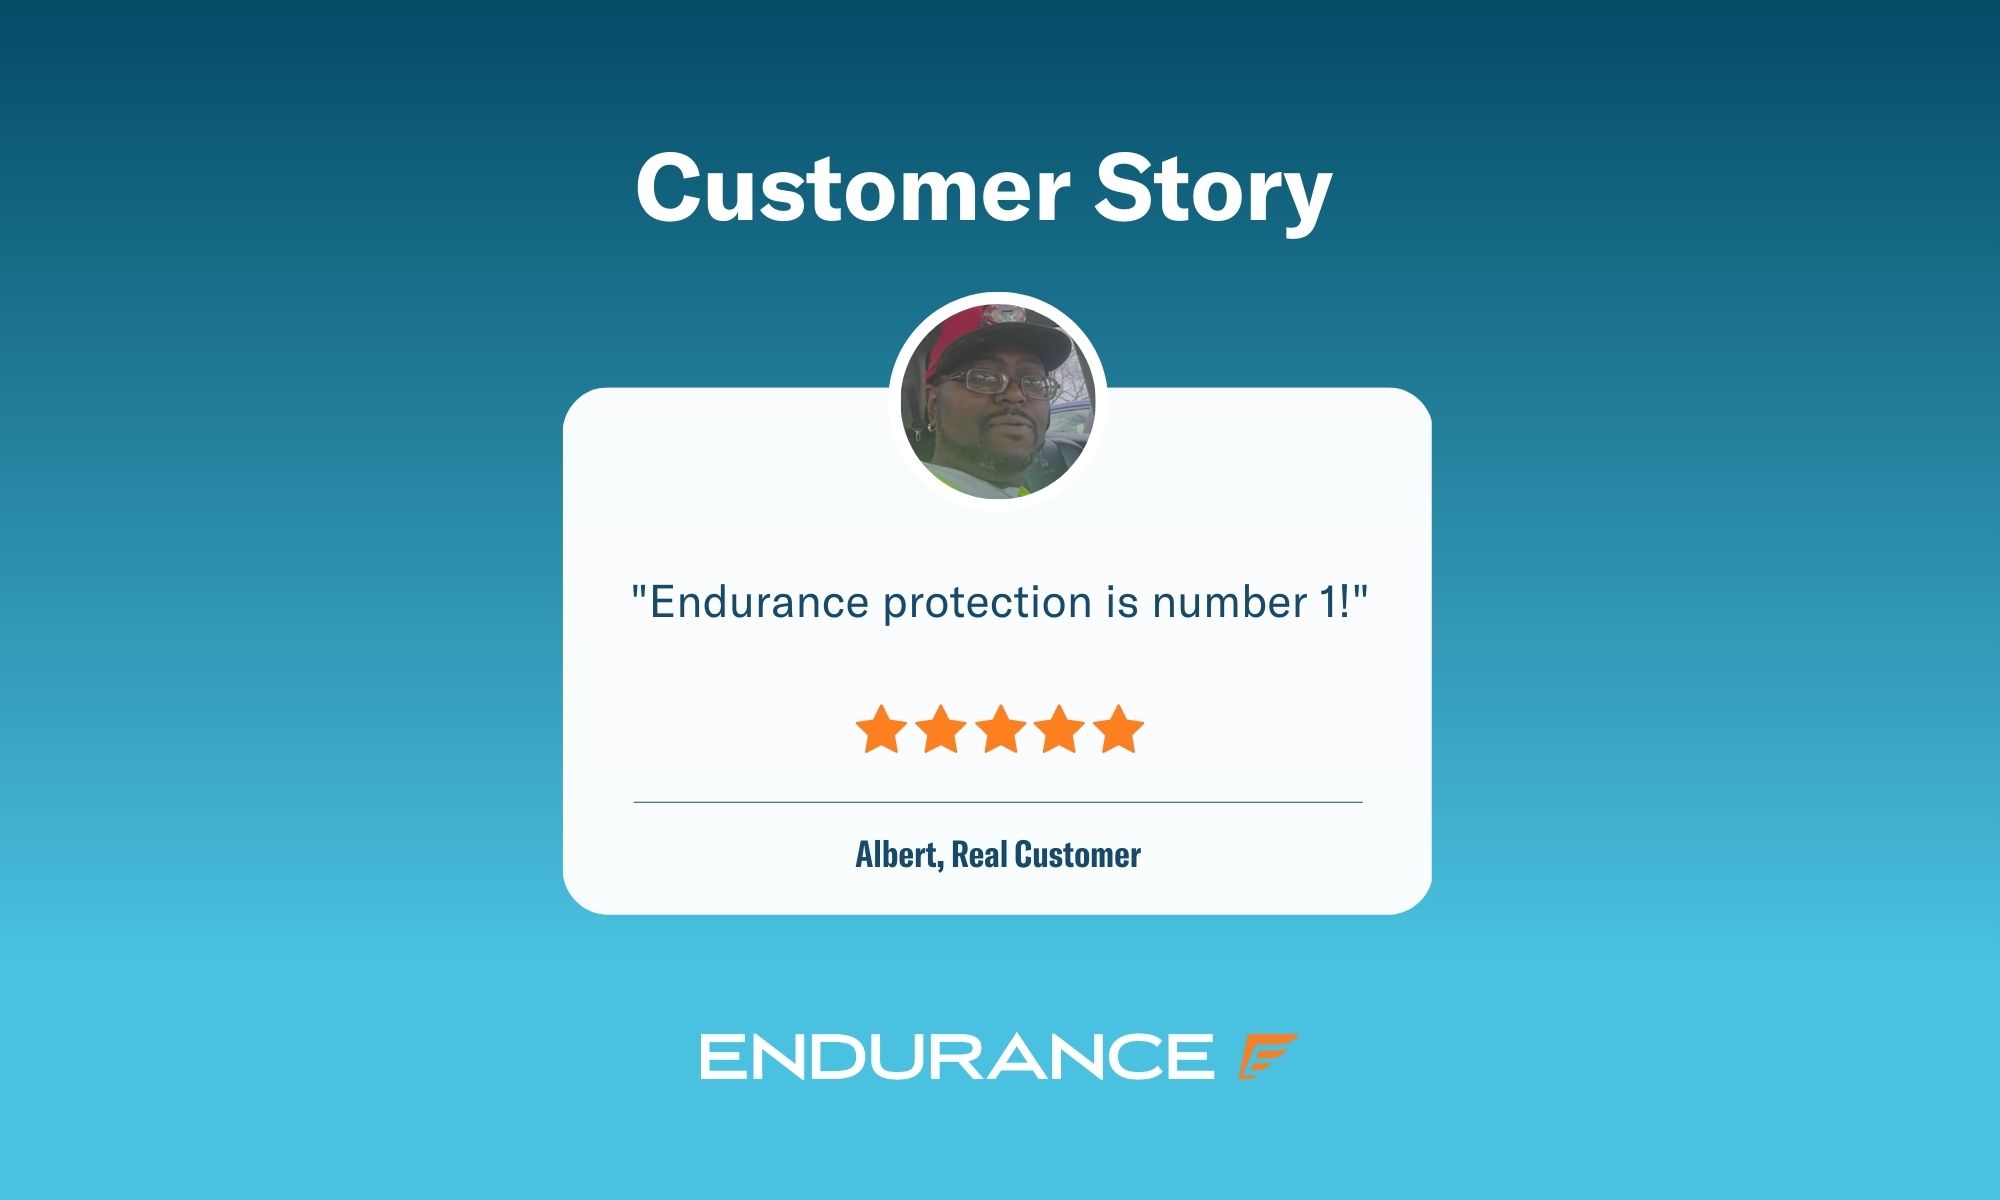 Endurance warranty review from a real customer named Albert